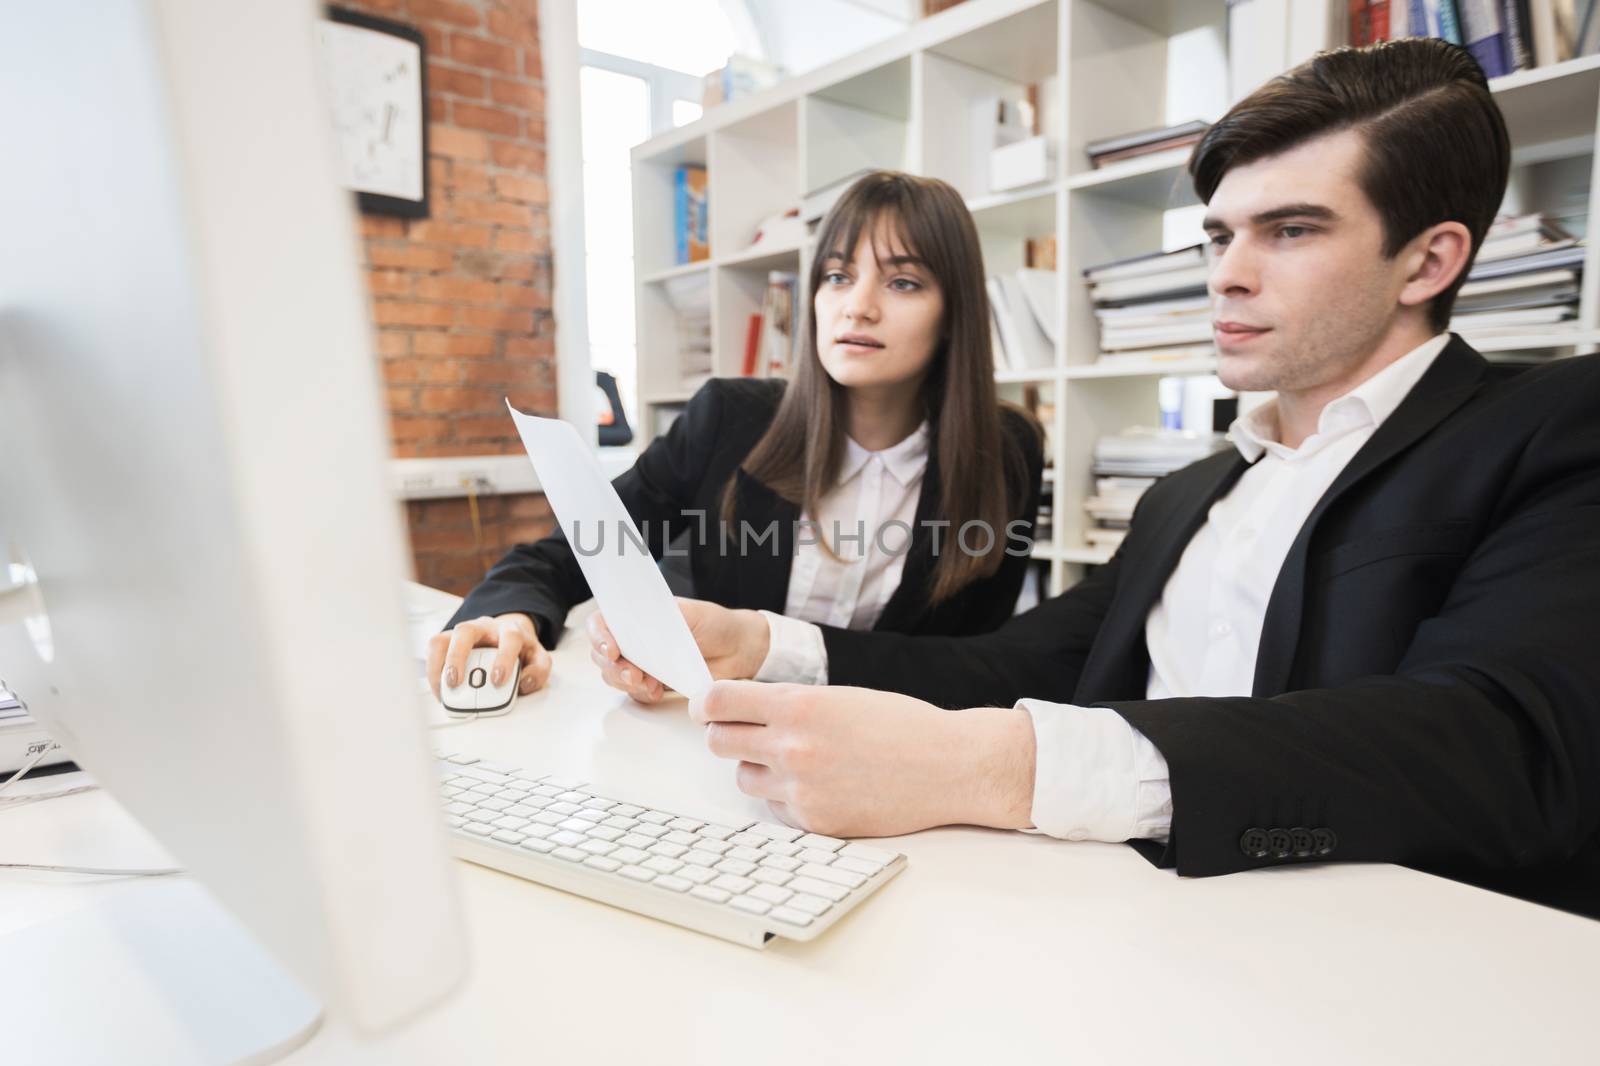 Two business people working together with documents sitting in front of computer monitor in office